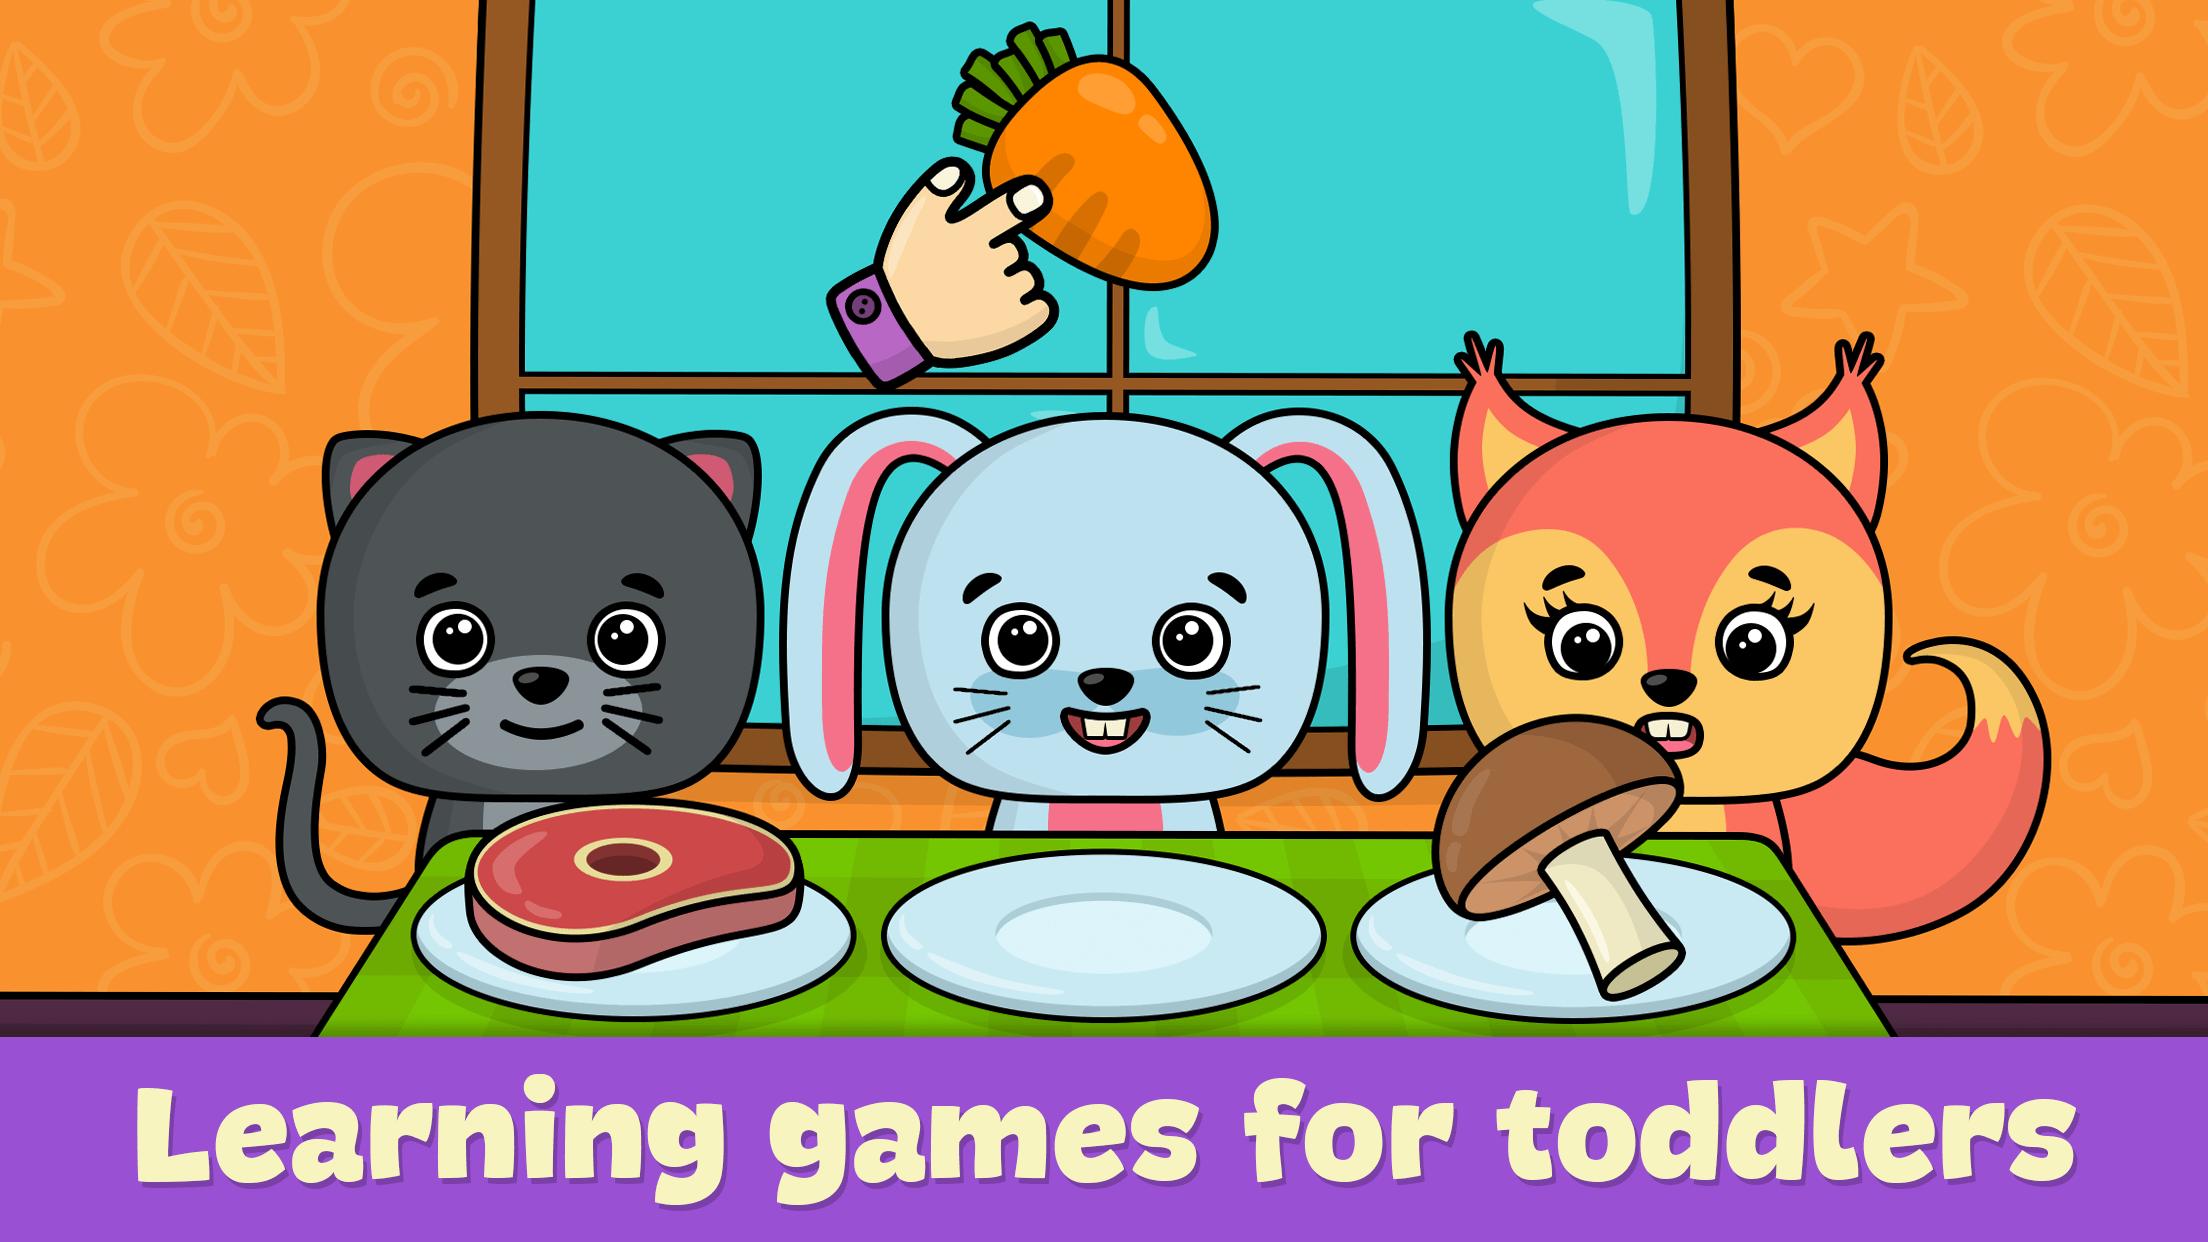 Shapes and Colors – Kids games for toddlers 2.25 Screenshot 1